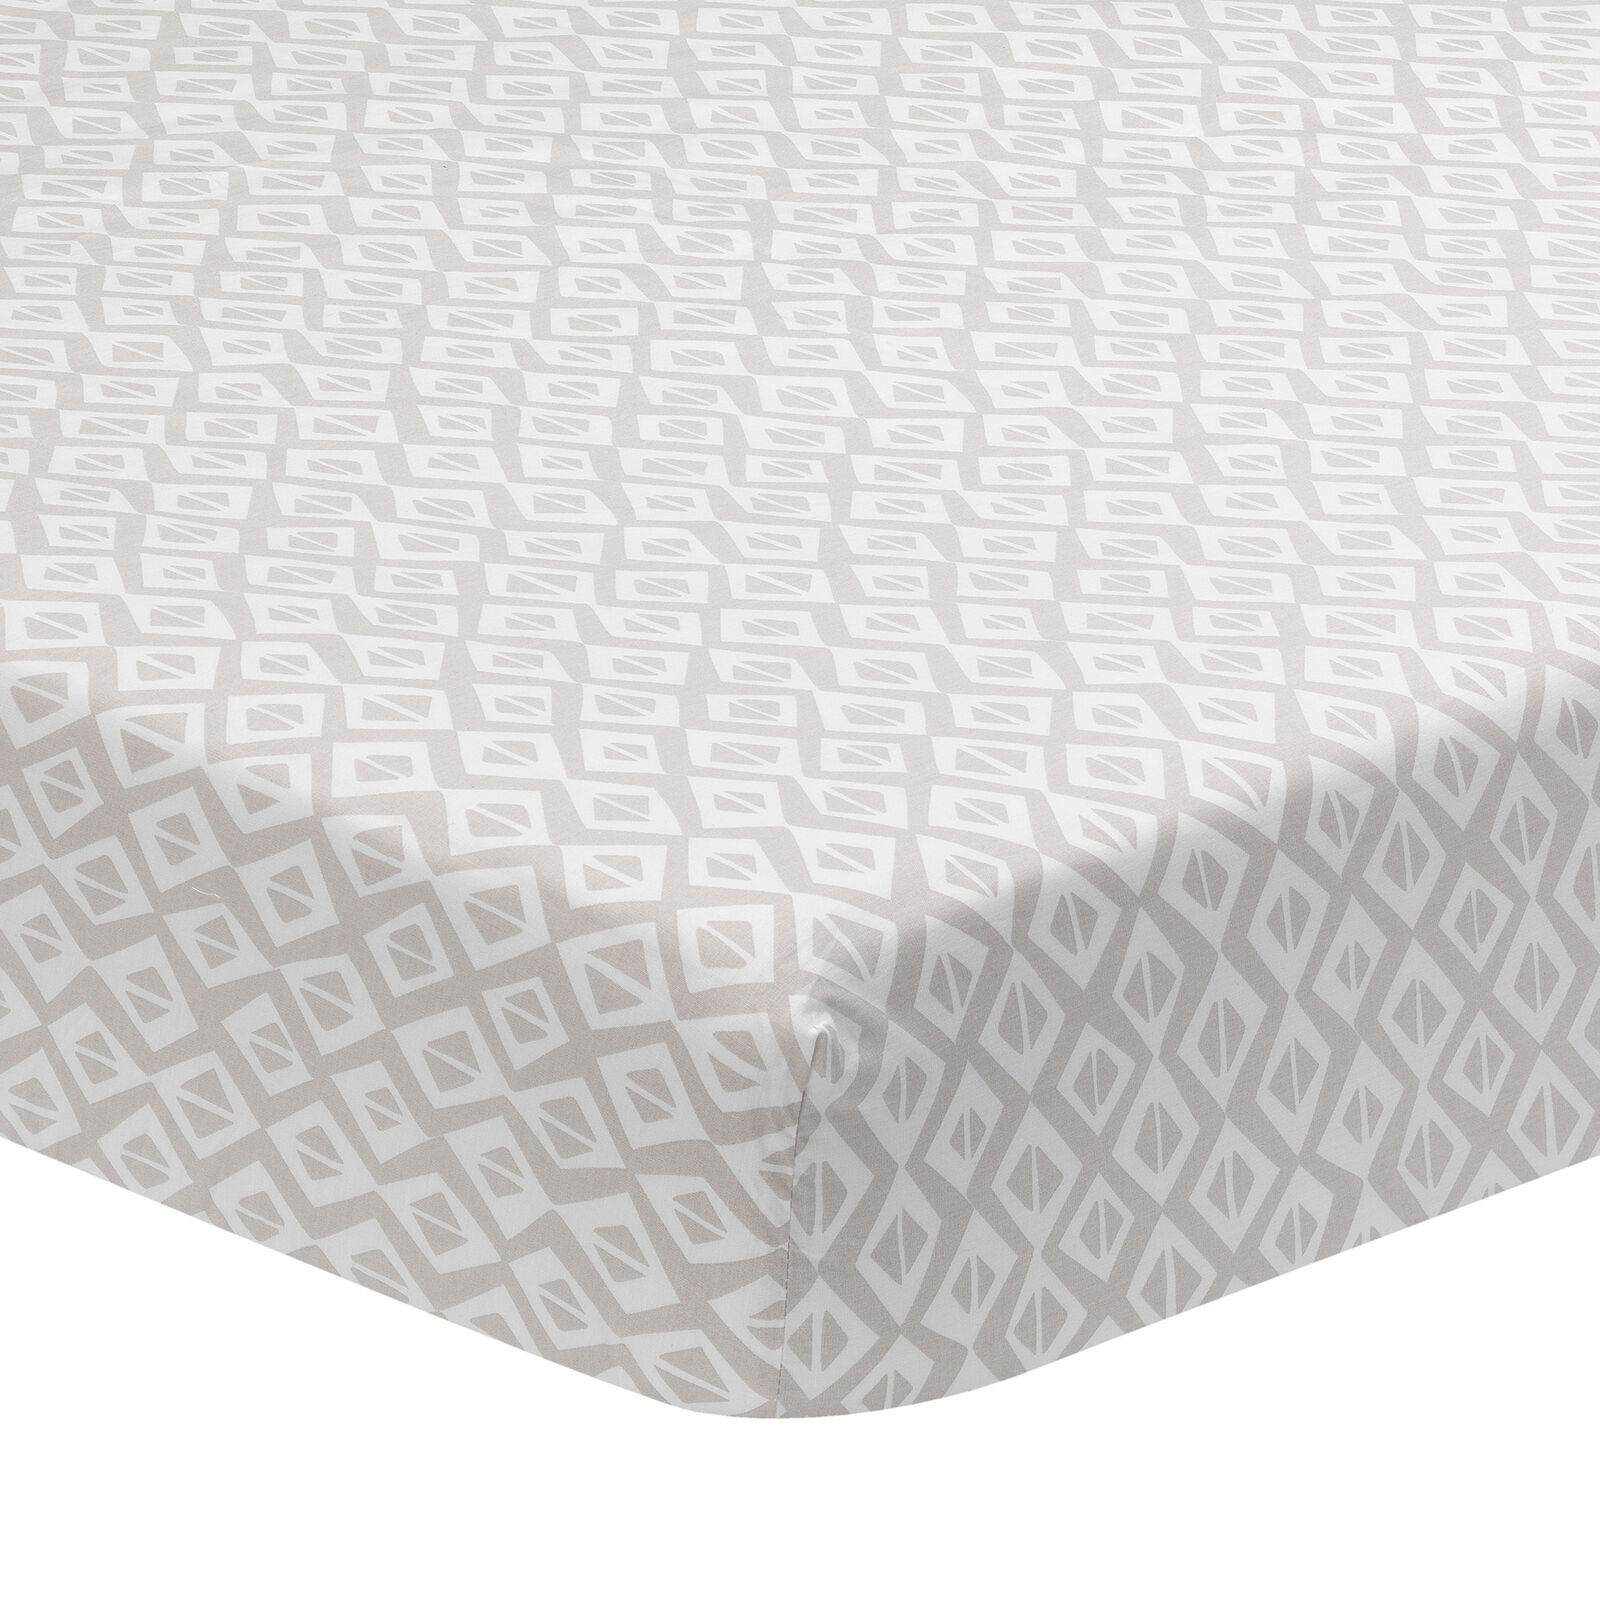 Lambs & Ivy Signature Tribal Geo Taupe/white Organic Cotton Fitted Crib Sheet